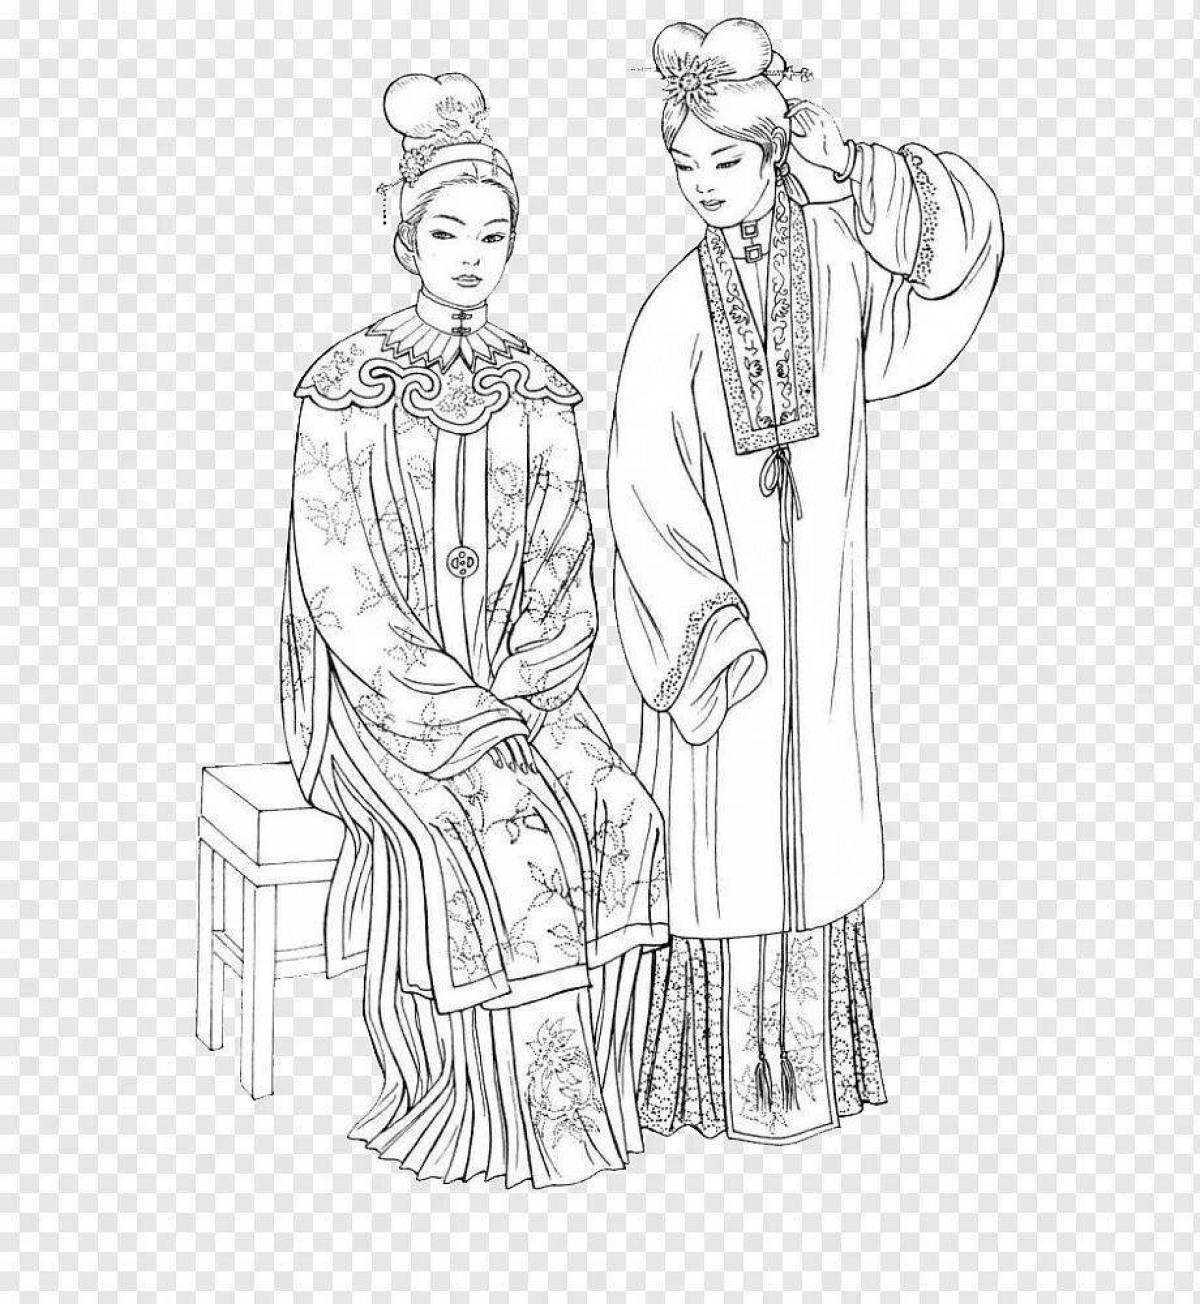 Humorous Chinese costume coloring book